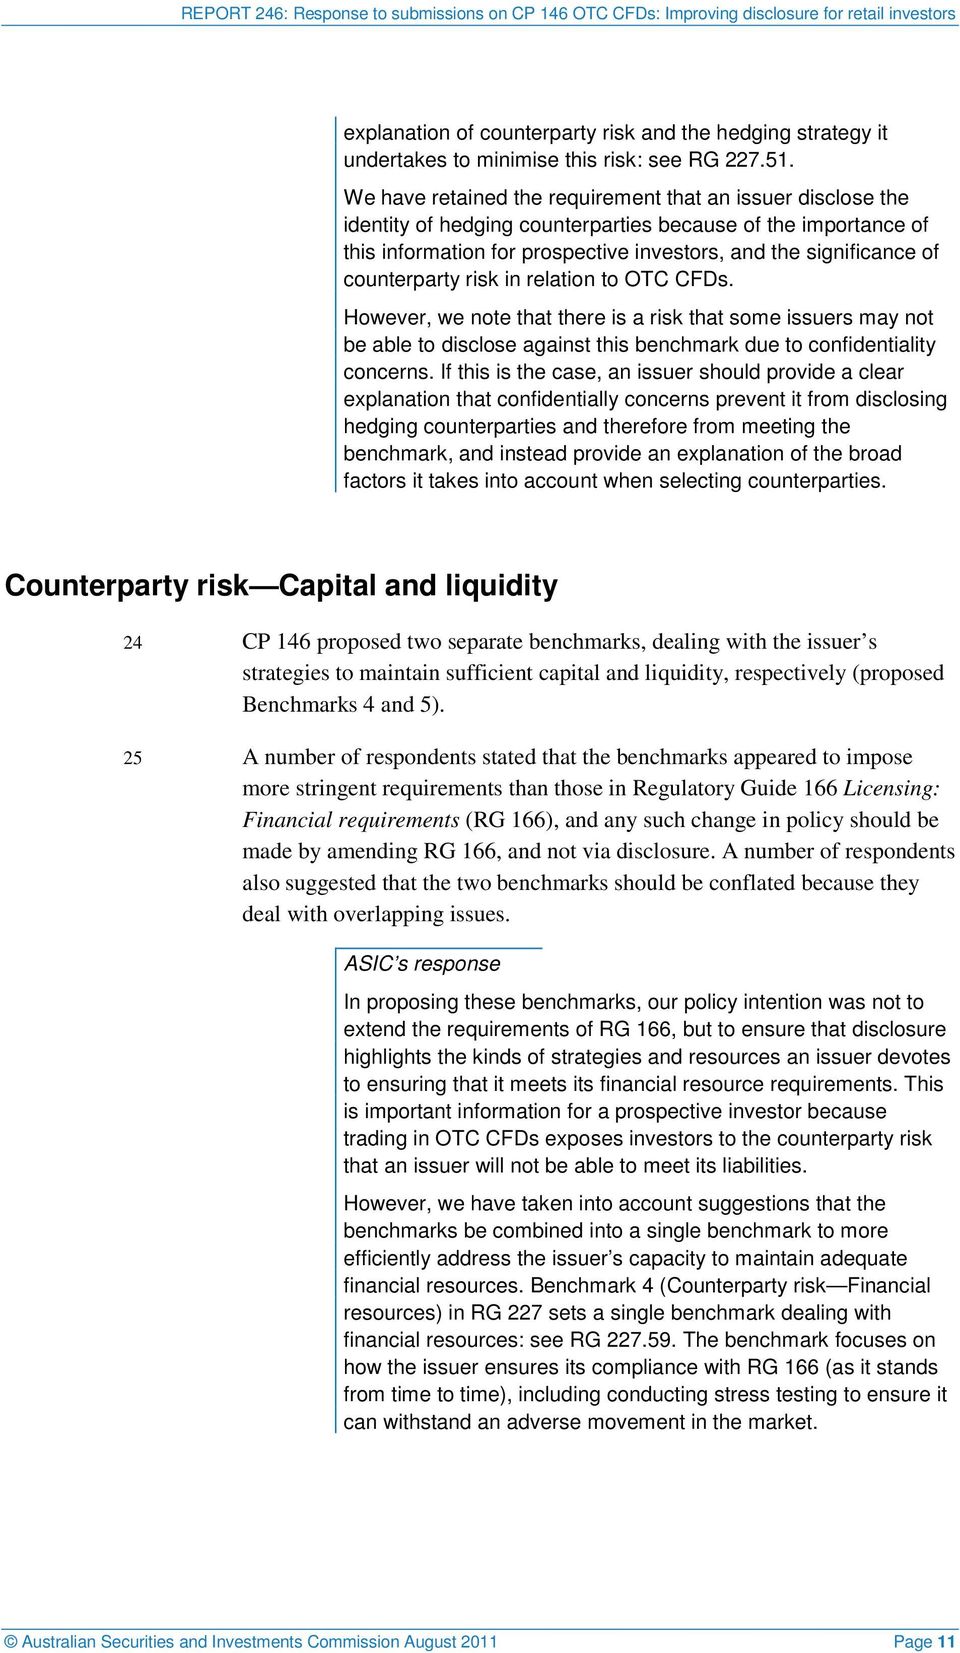 counterparty risk in relation to OTC CFDs. However, we note that there is a risk that some issuers may not be able to disclose against this benchmark due to confidentiality concerns.